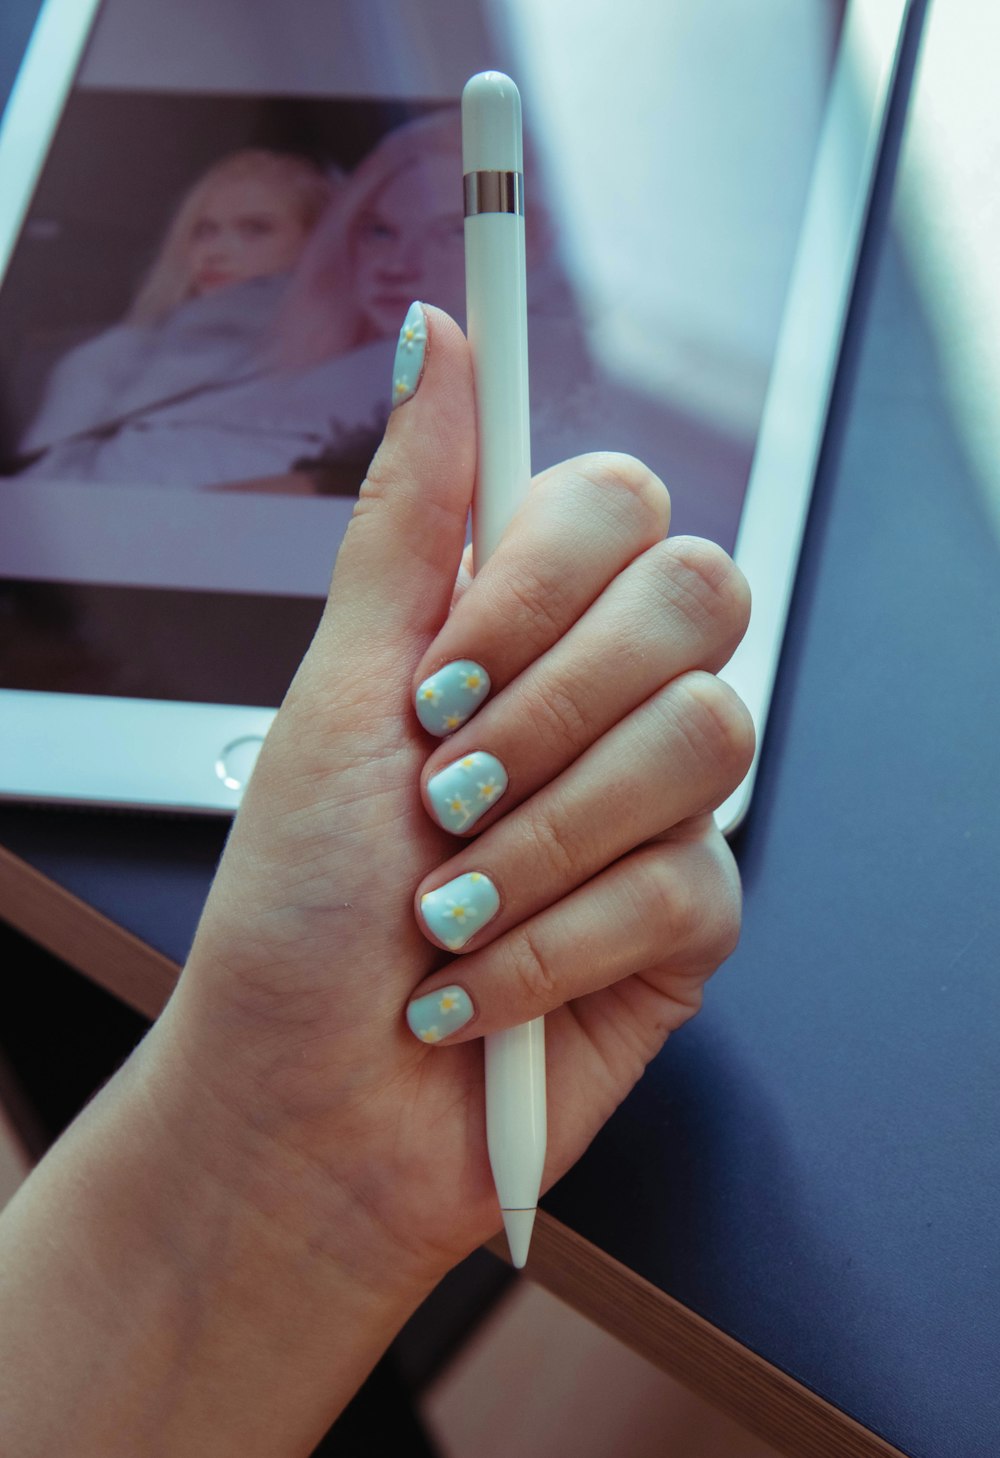 person with teal manicure holding white tablet computer